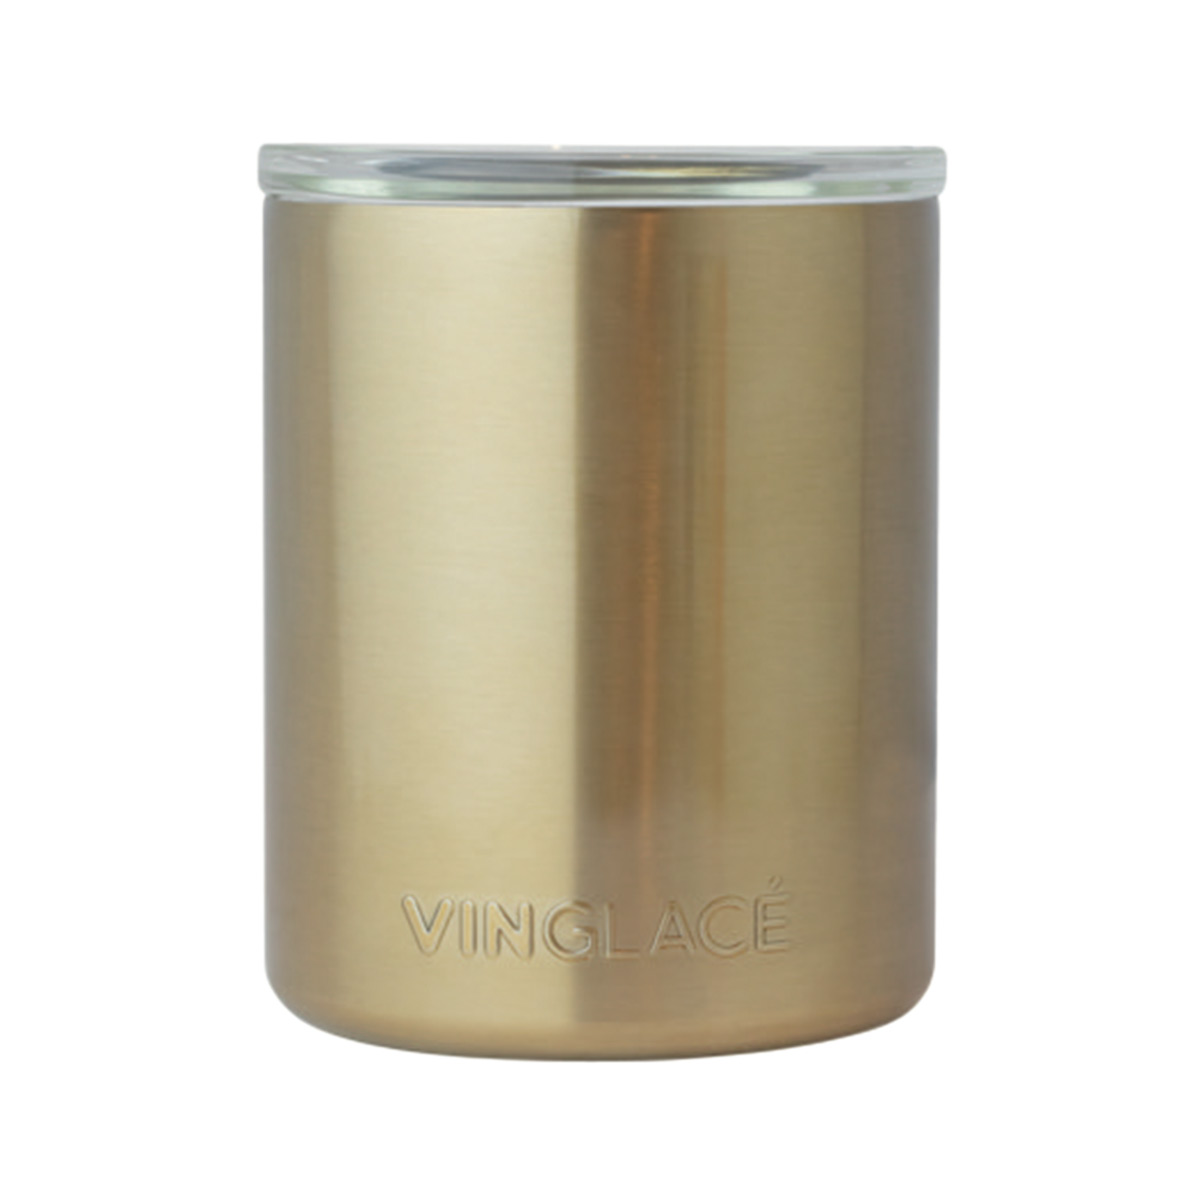 https://www.containerstore.com/catalogimages/487949/10095101-COPPER-WHISKEY-WHITE-GROUND.jpg